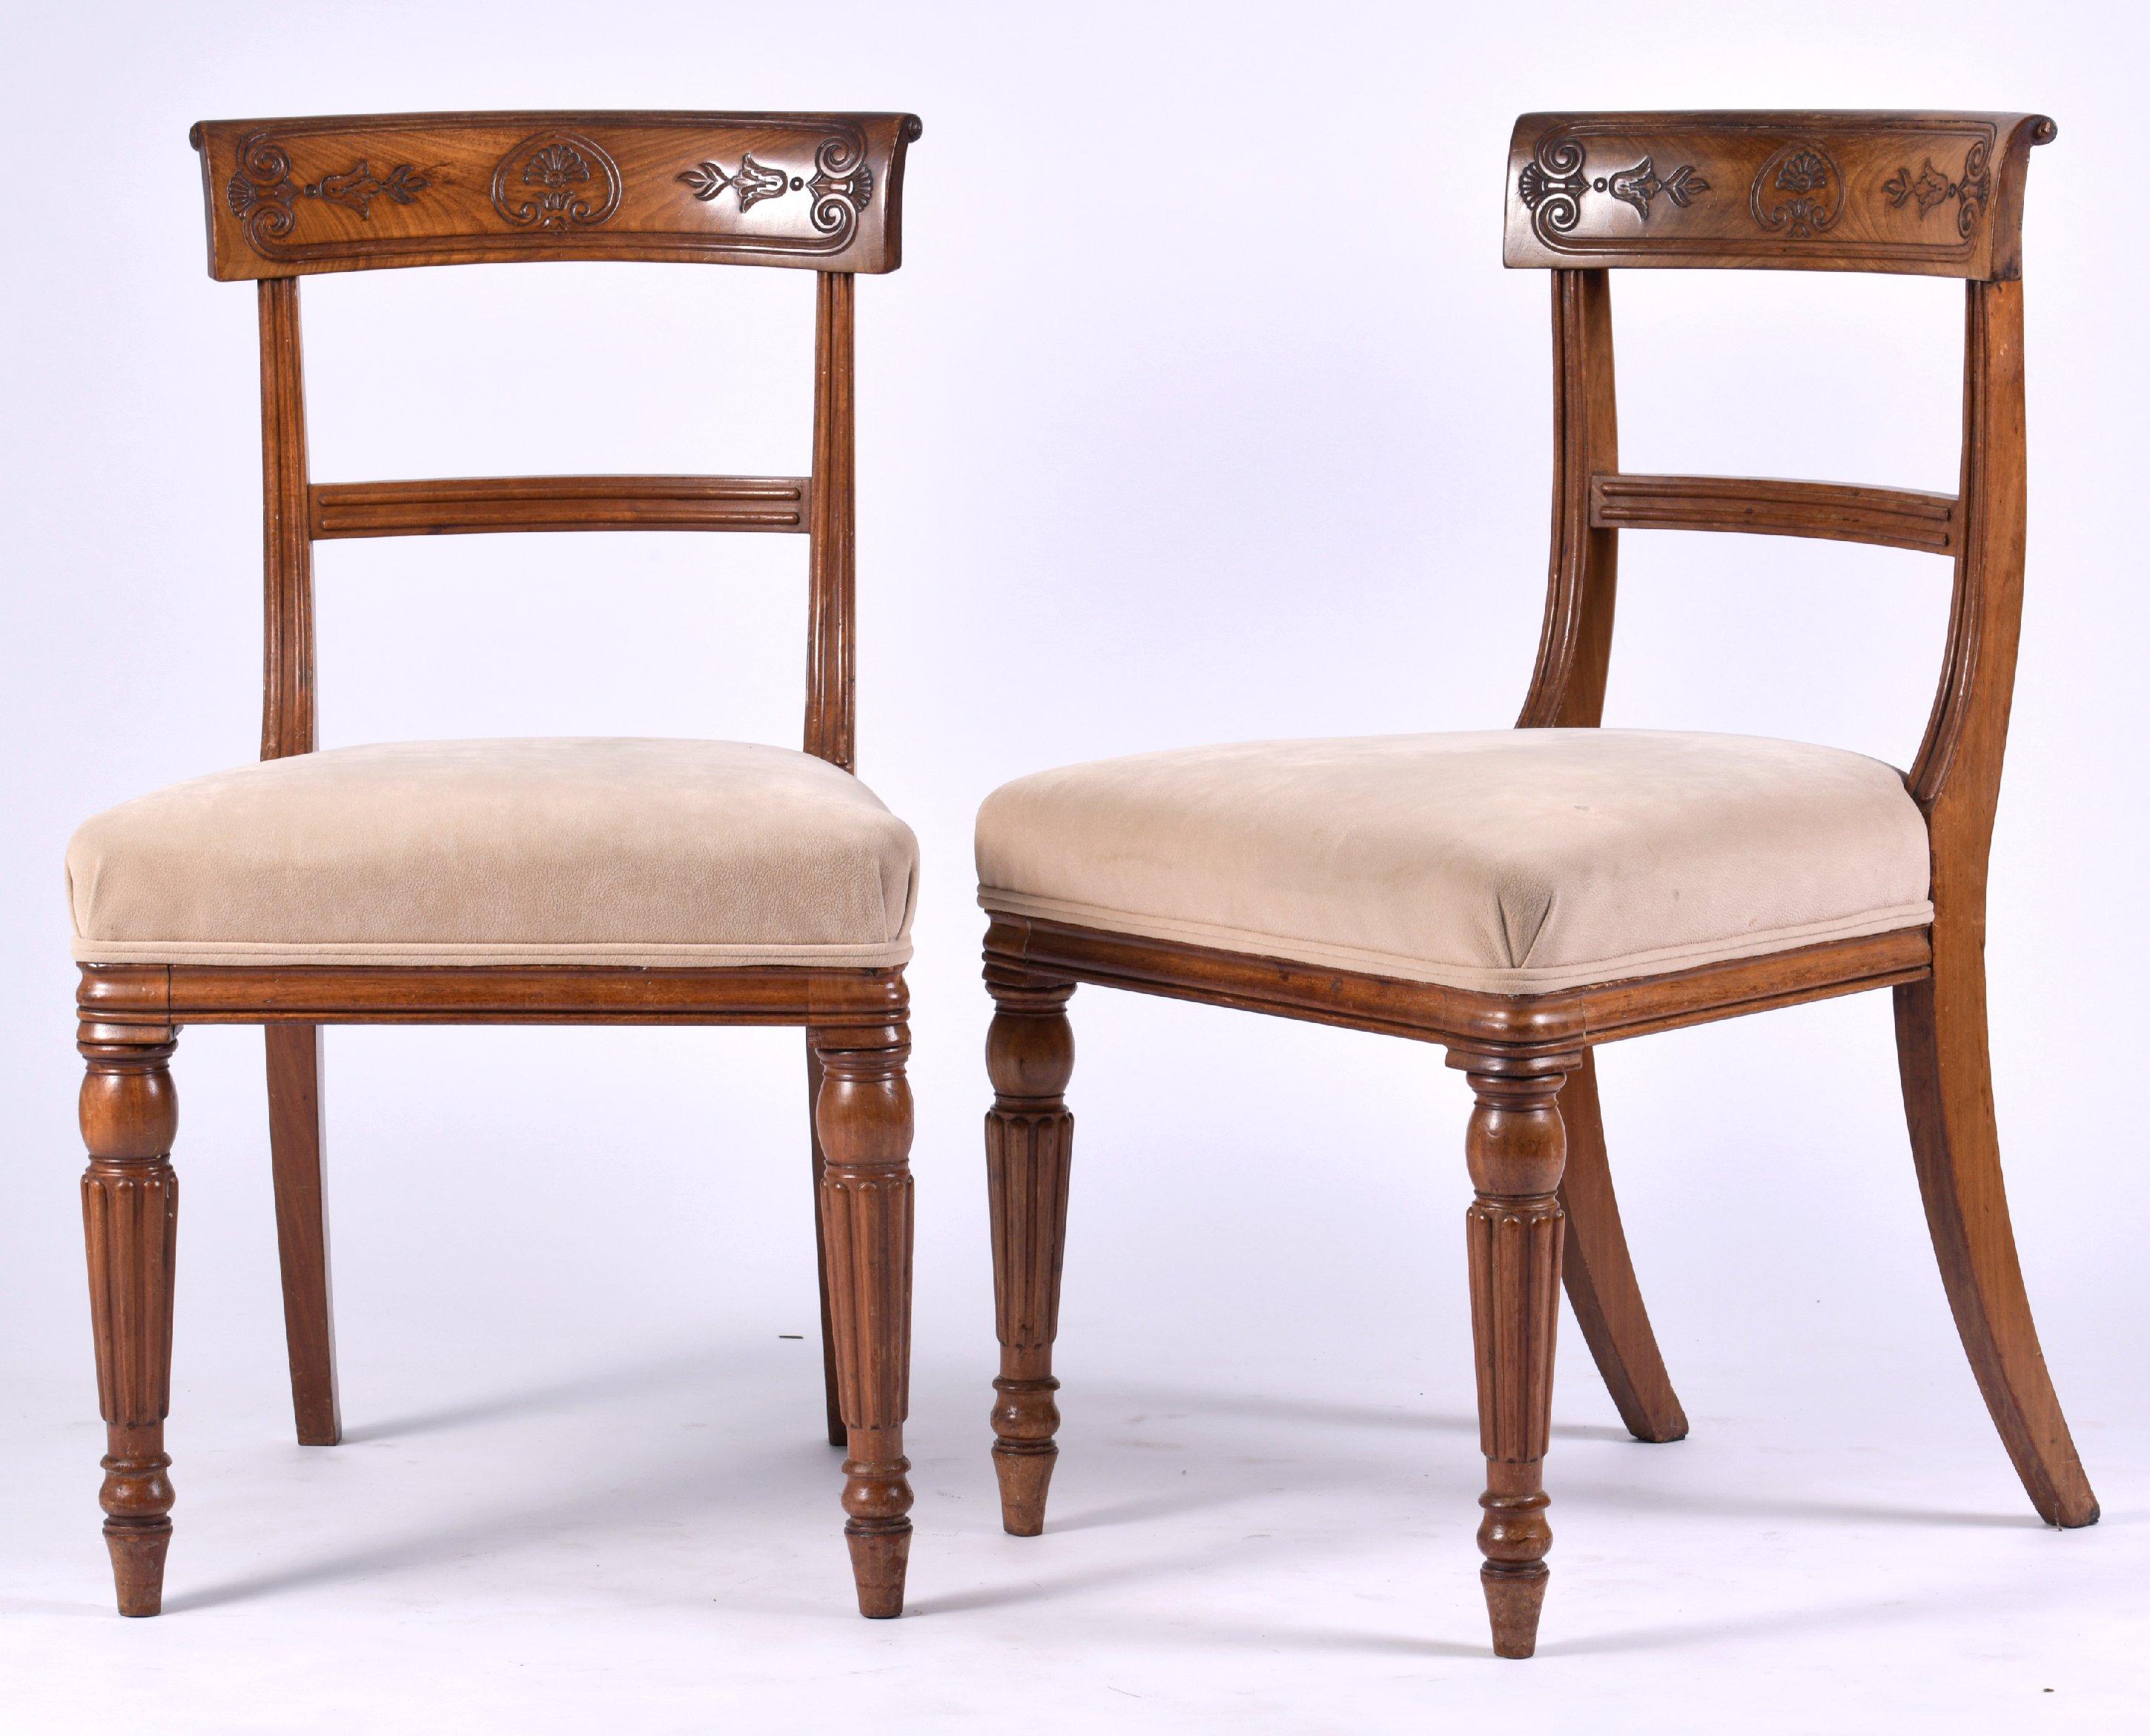 This lovely set of 6 George IV mahogany side chairs feature reeded front and swept back legs with cream faux suede upholstered seats. The chairs have carved detailing on the curved back splat and are in the manner of Gillows. Each chair measures 19